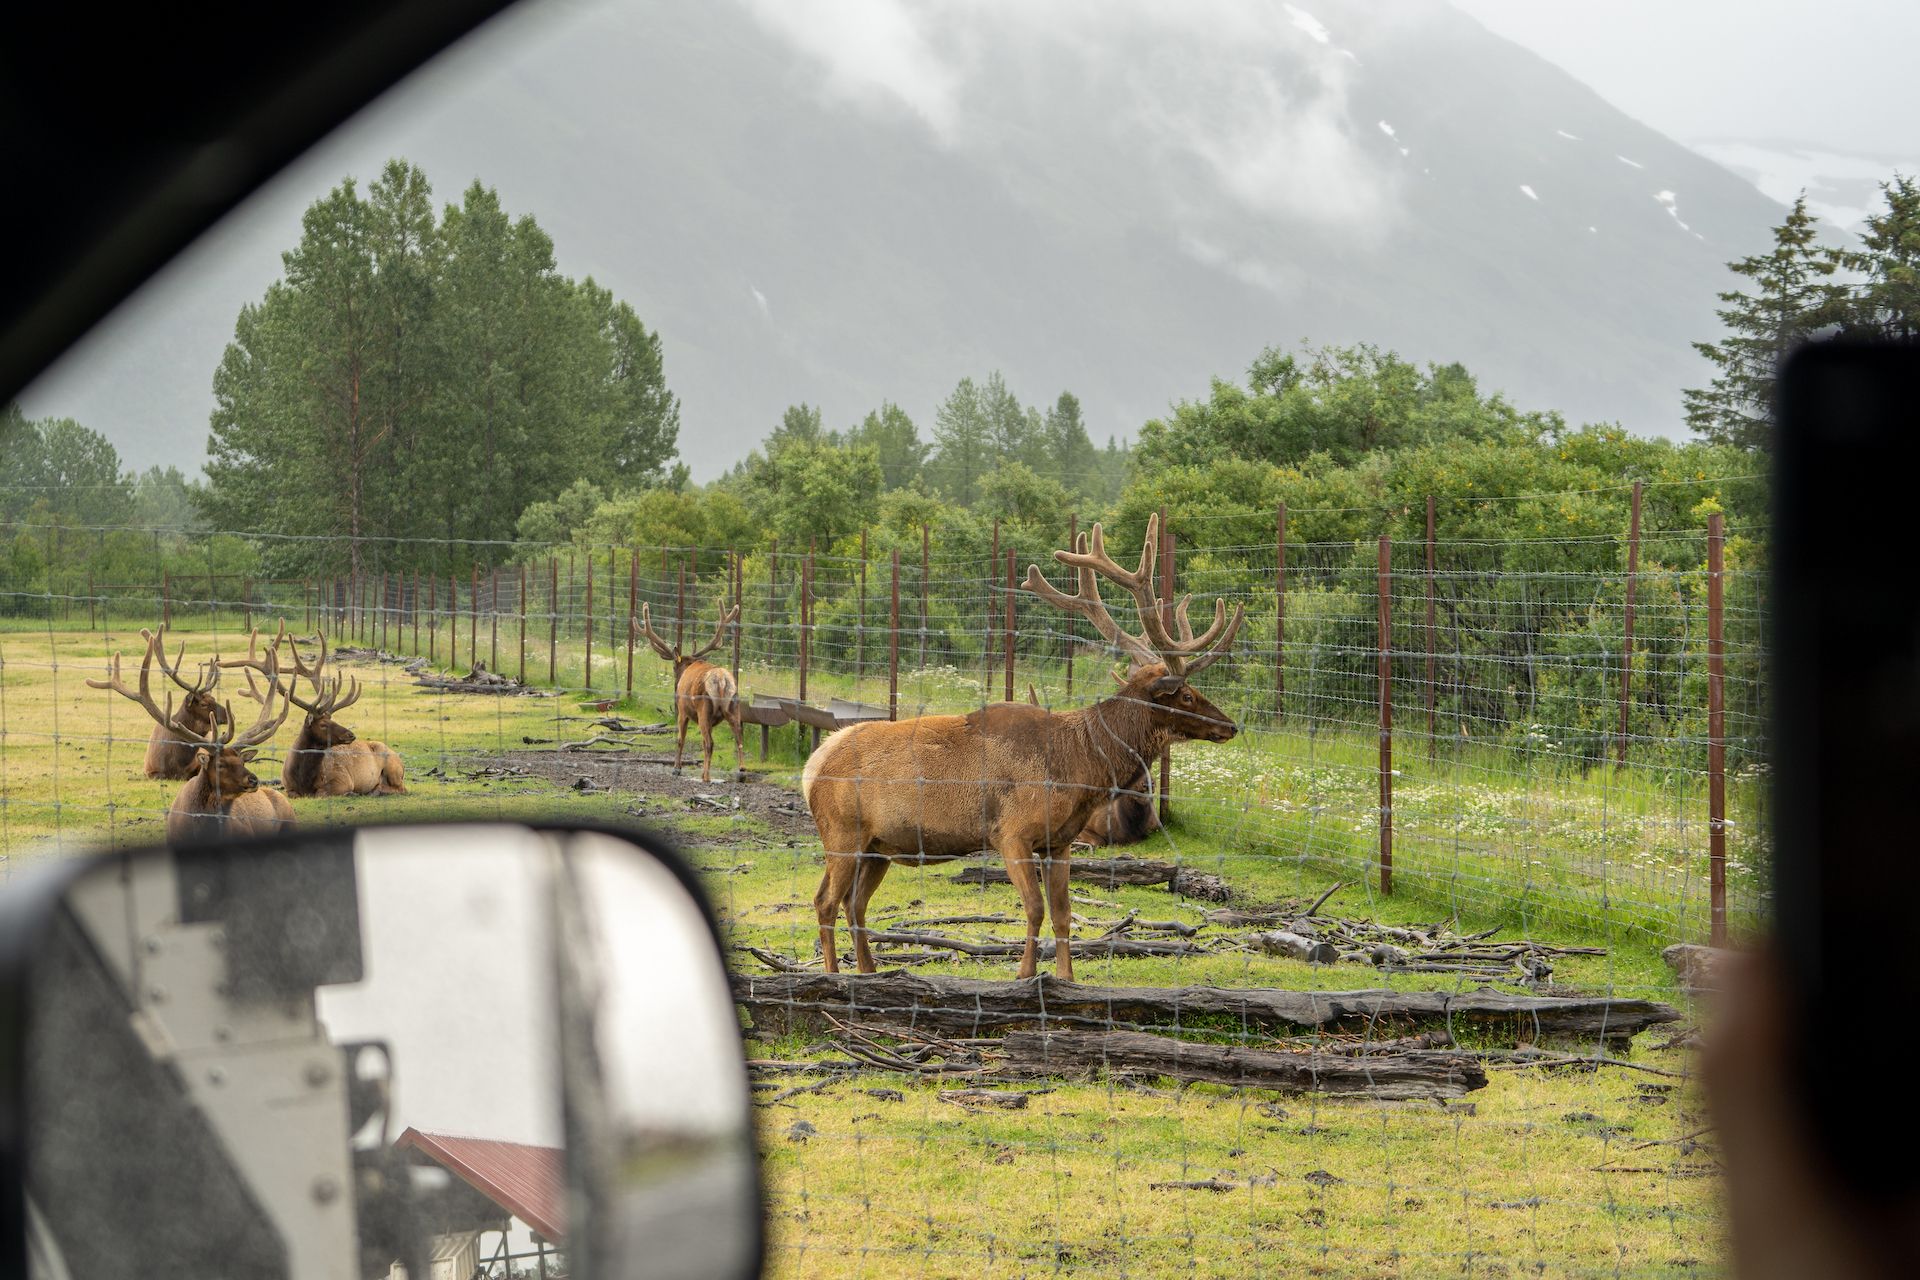 We’ve never seen bull elks of this size in the wild. Their antlers were impressive!